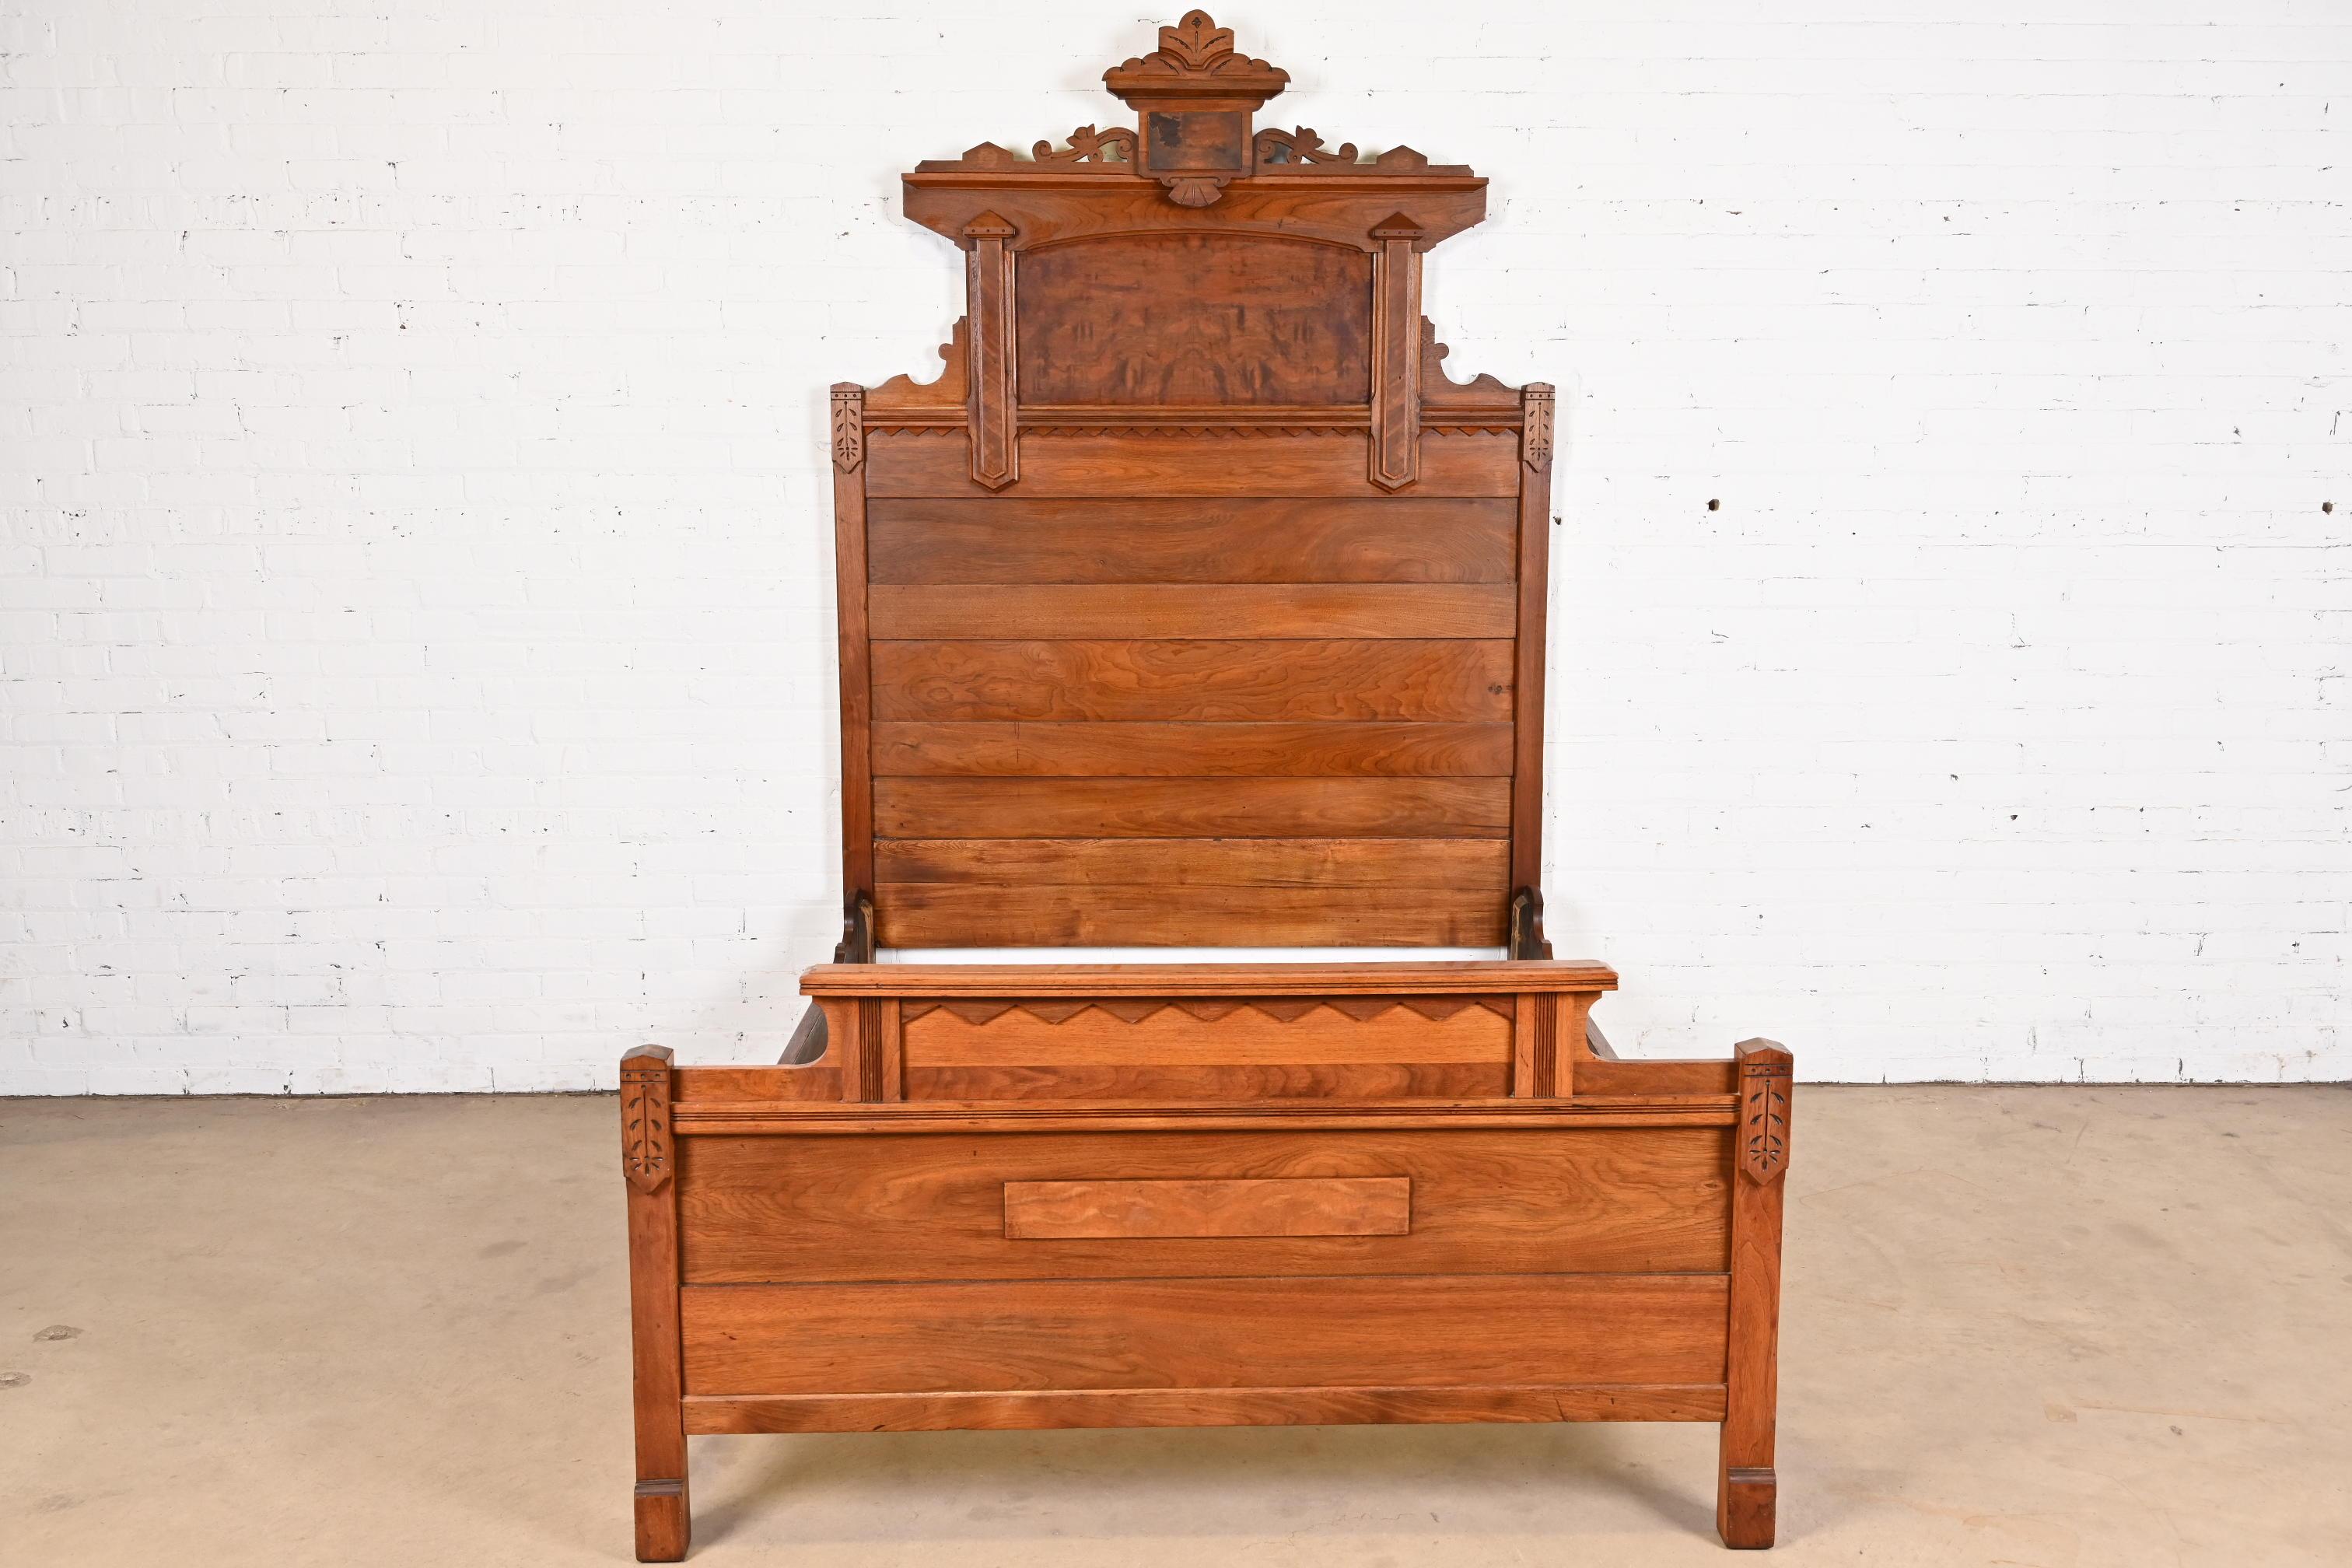 American Antique Monumental Eastlake Victorian Carved Burled Walnut Full Size Bed, 1880s For Sale